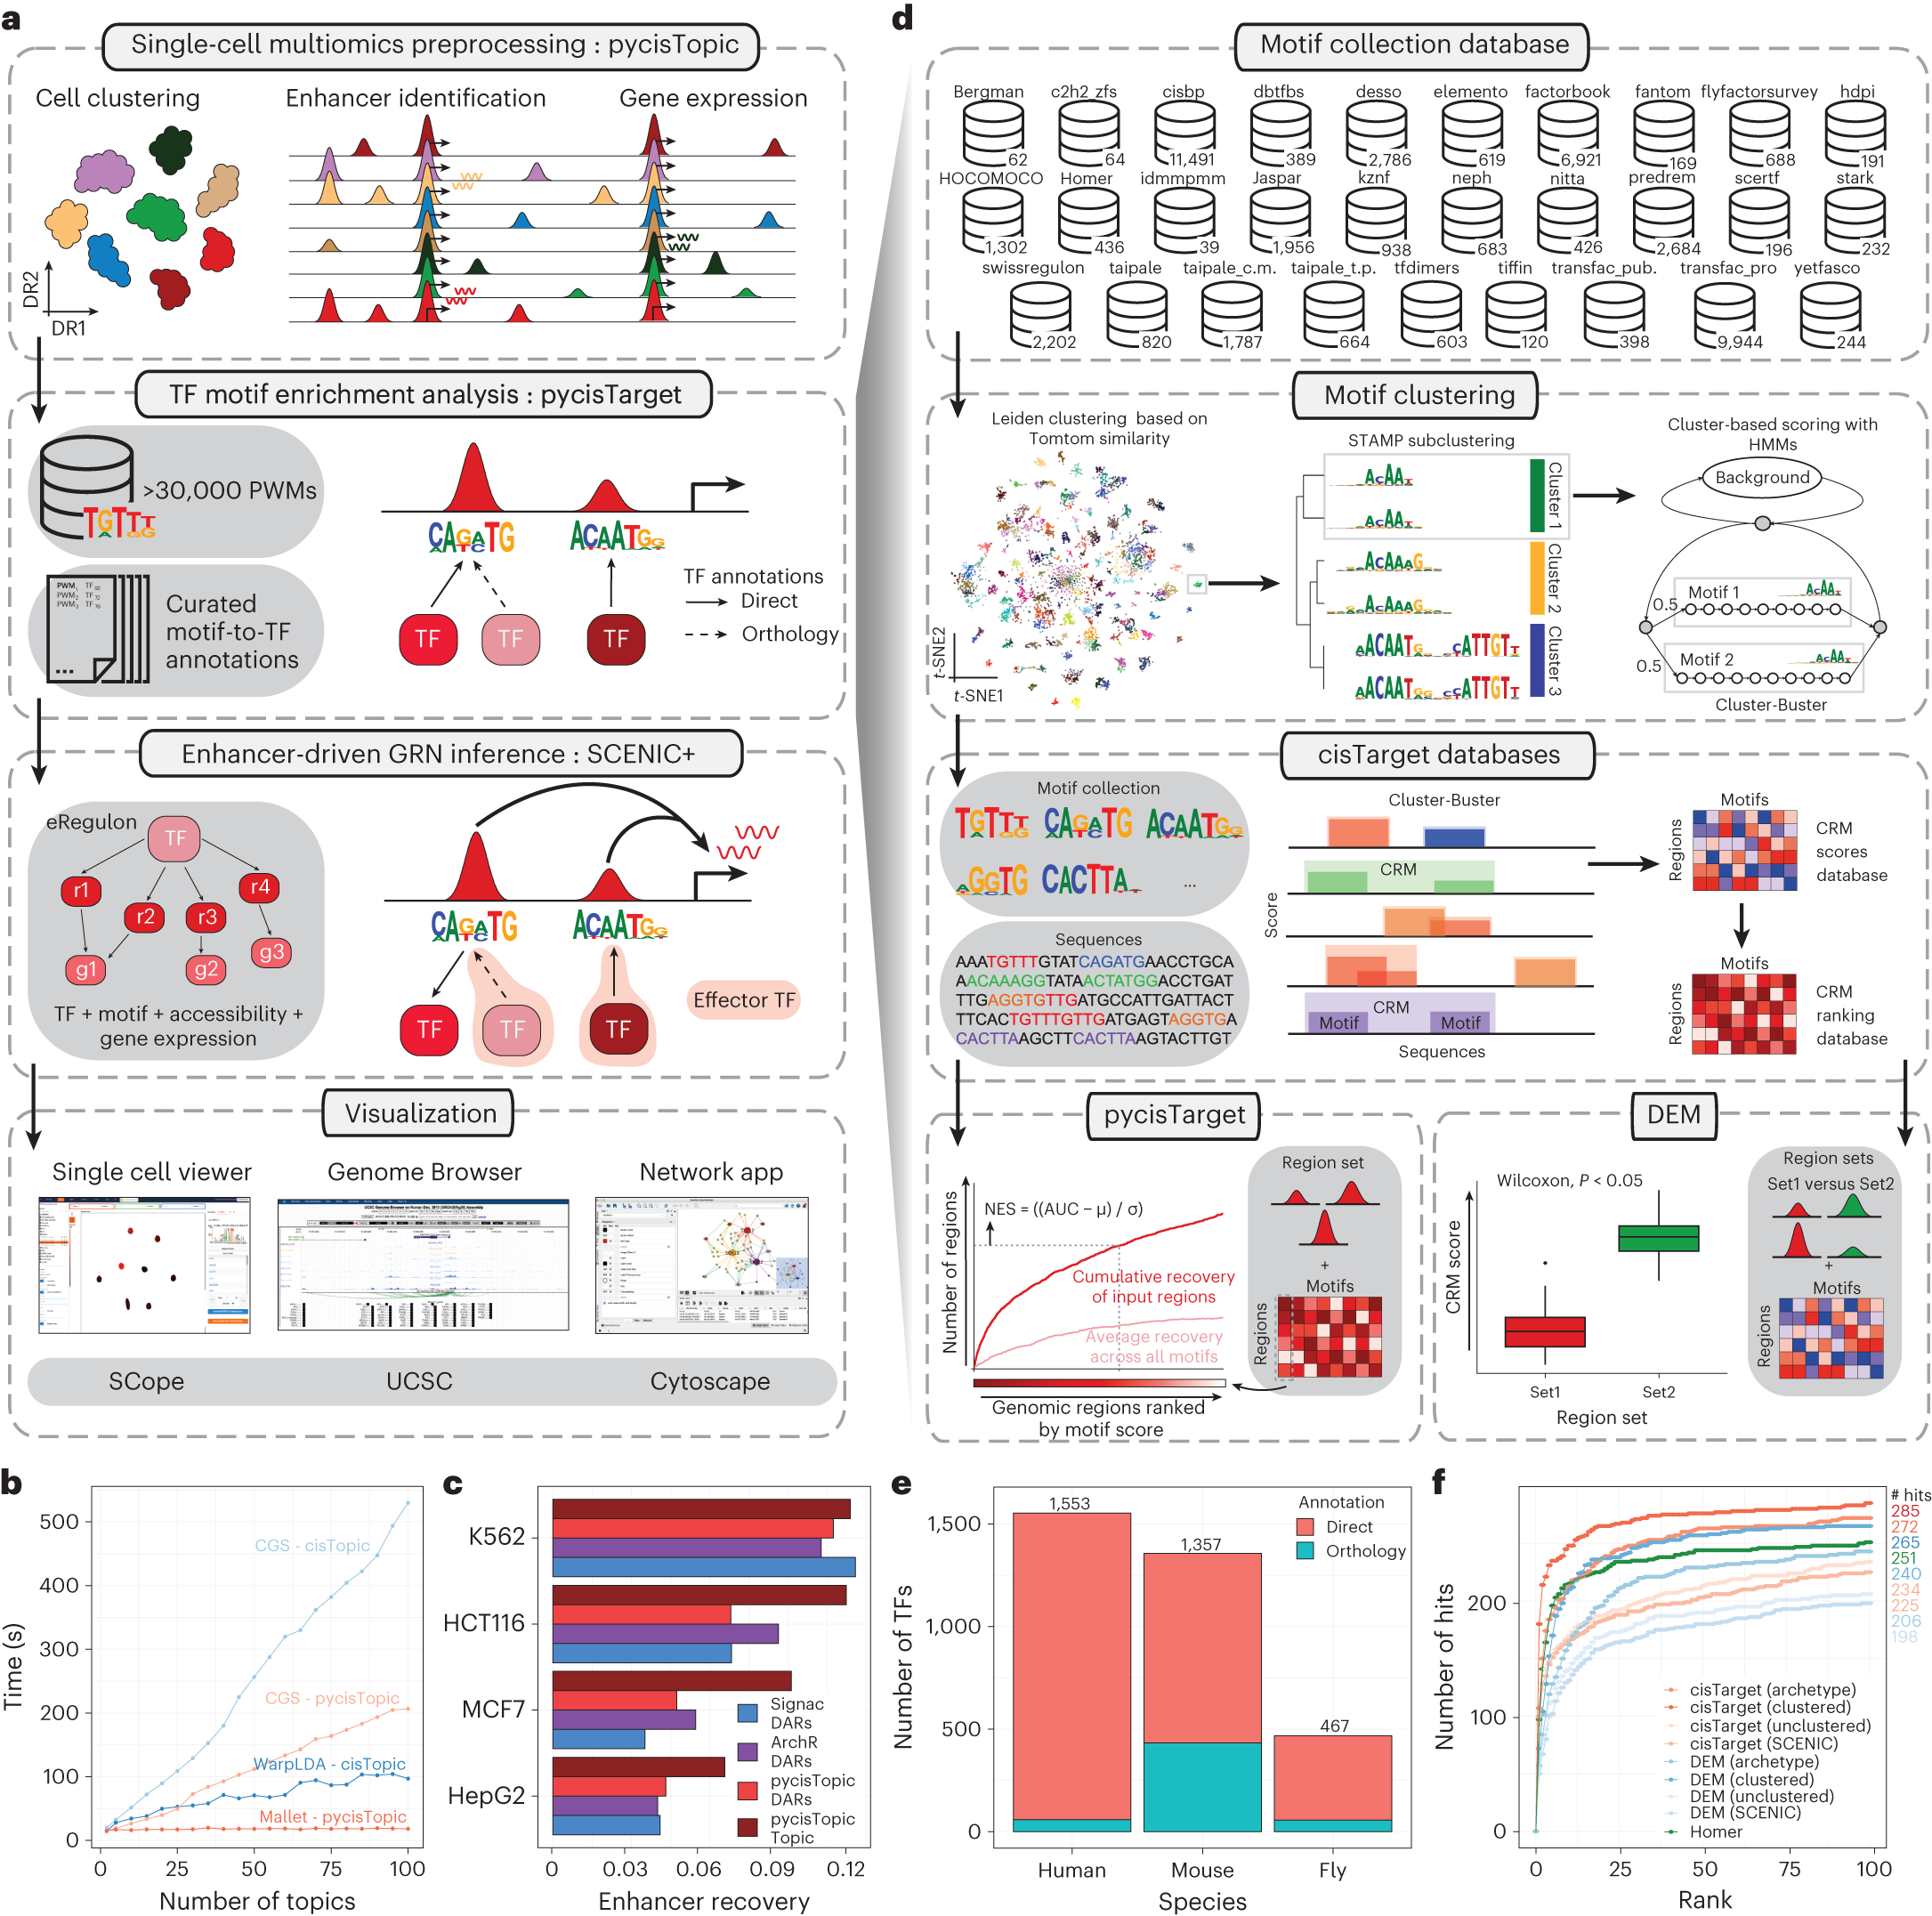 SCENIC+: single-cell multiomic inference of enhancers and gene